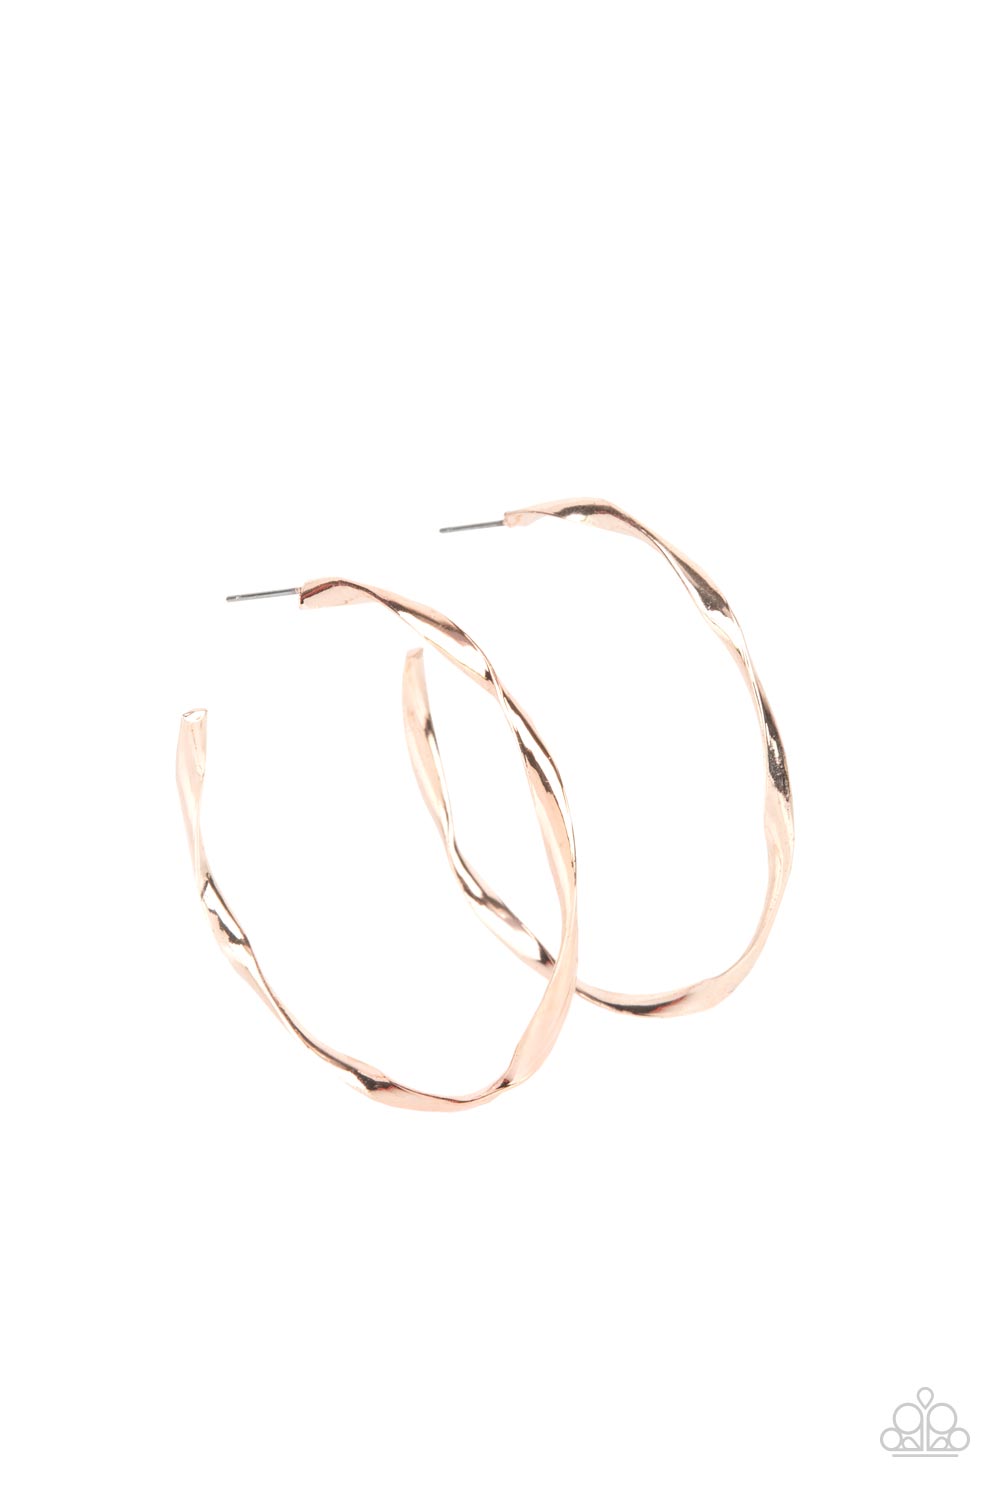 Radiantly Warped - Rose Gold Earrings - Paparazzi Accessories